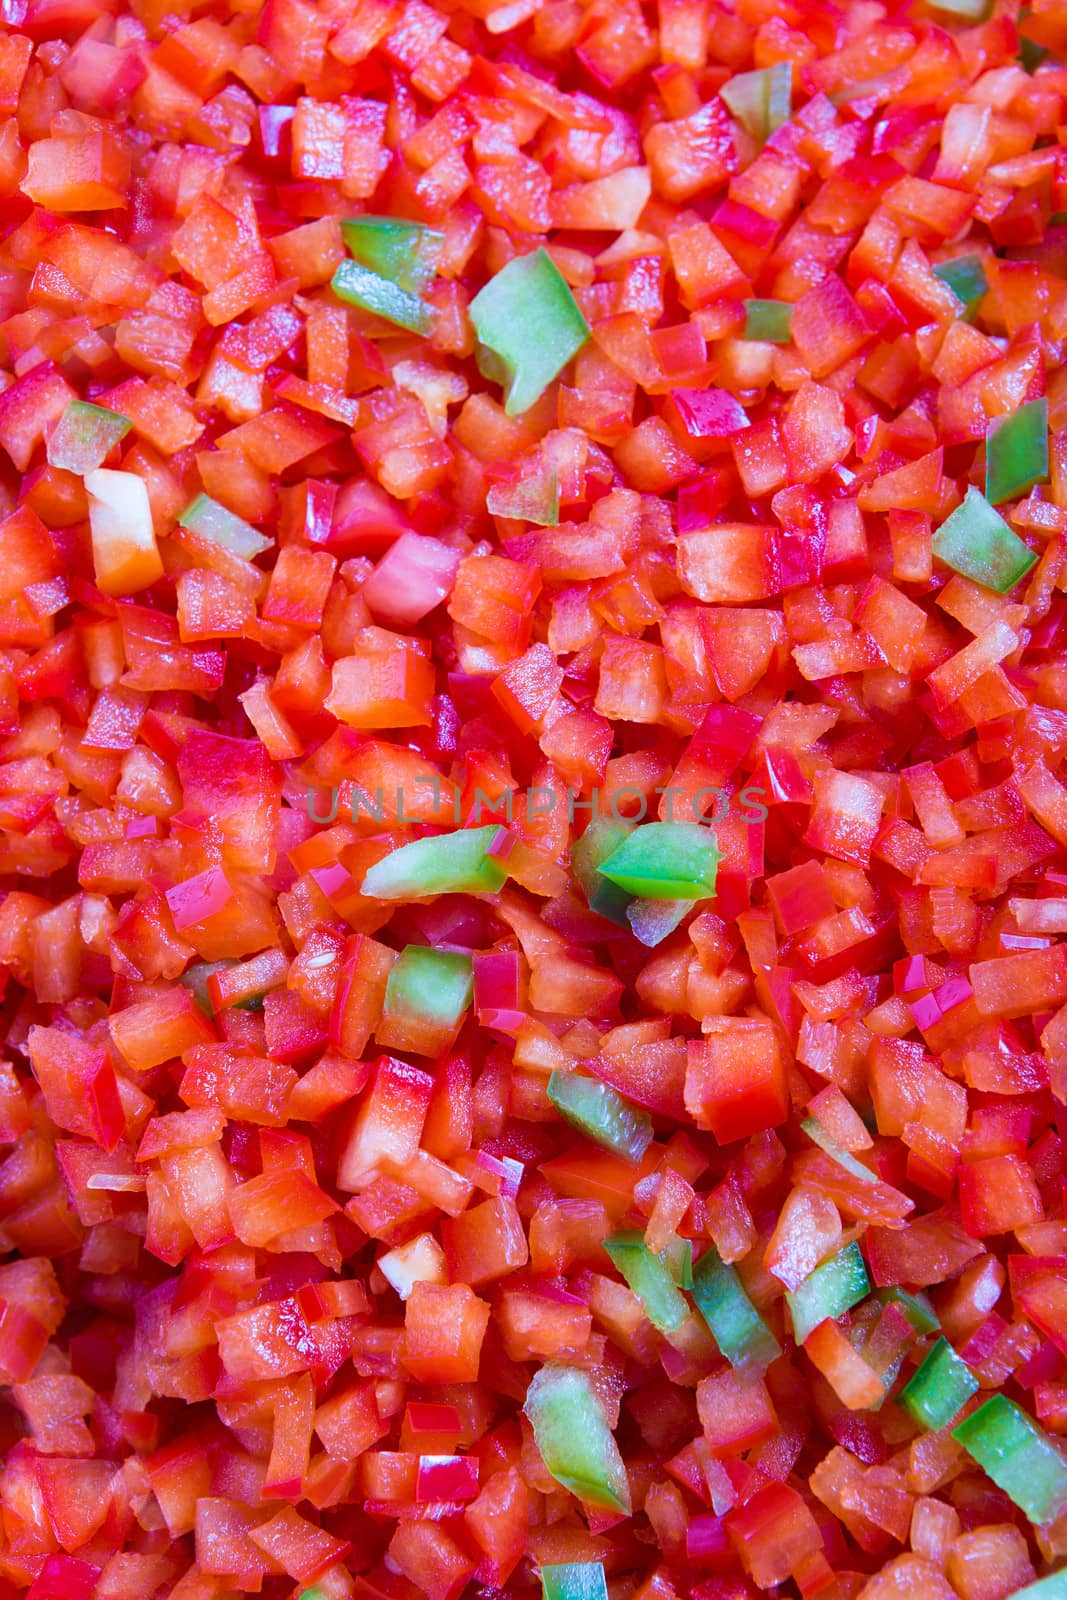 Red and some Green Belll Peppers Cleaned and Washed as Bacground by coskun